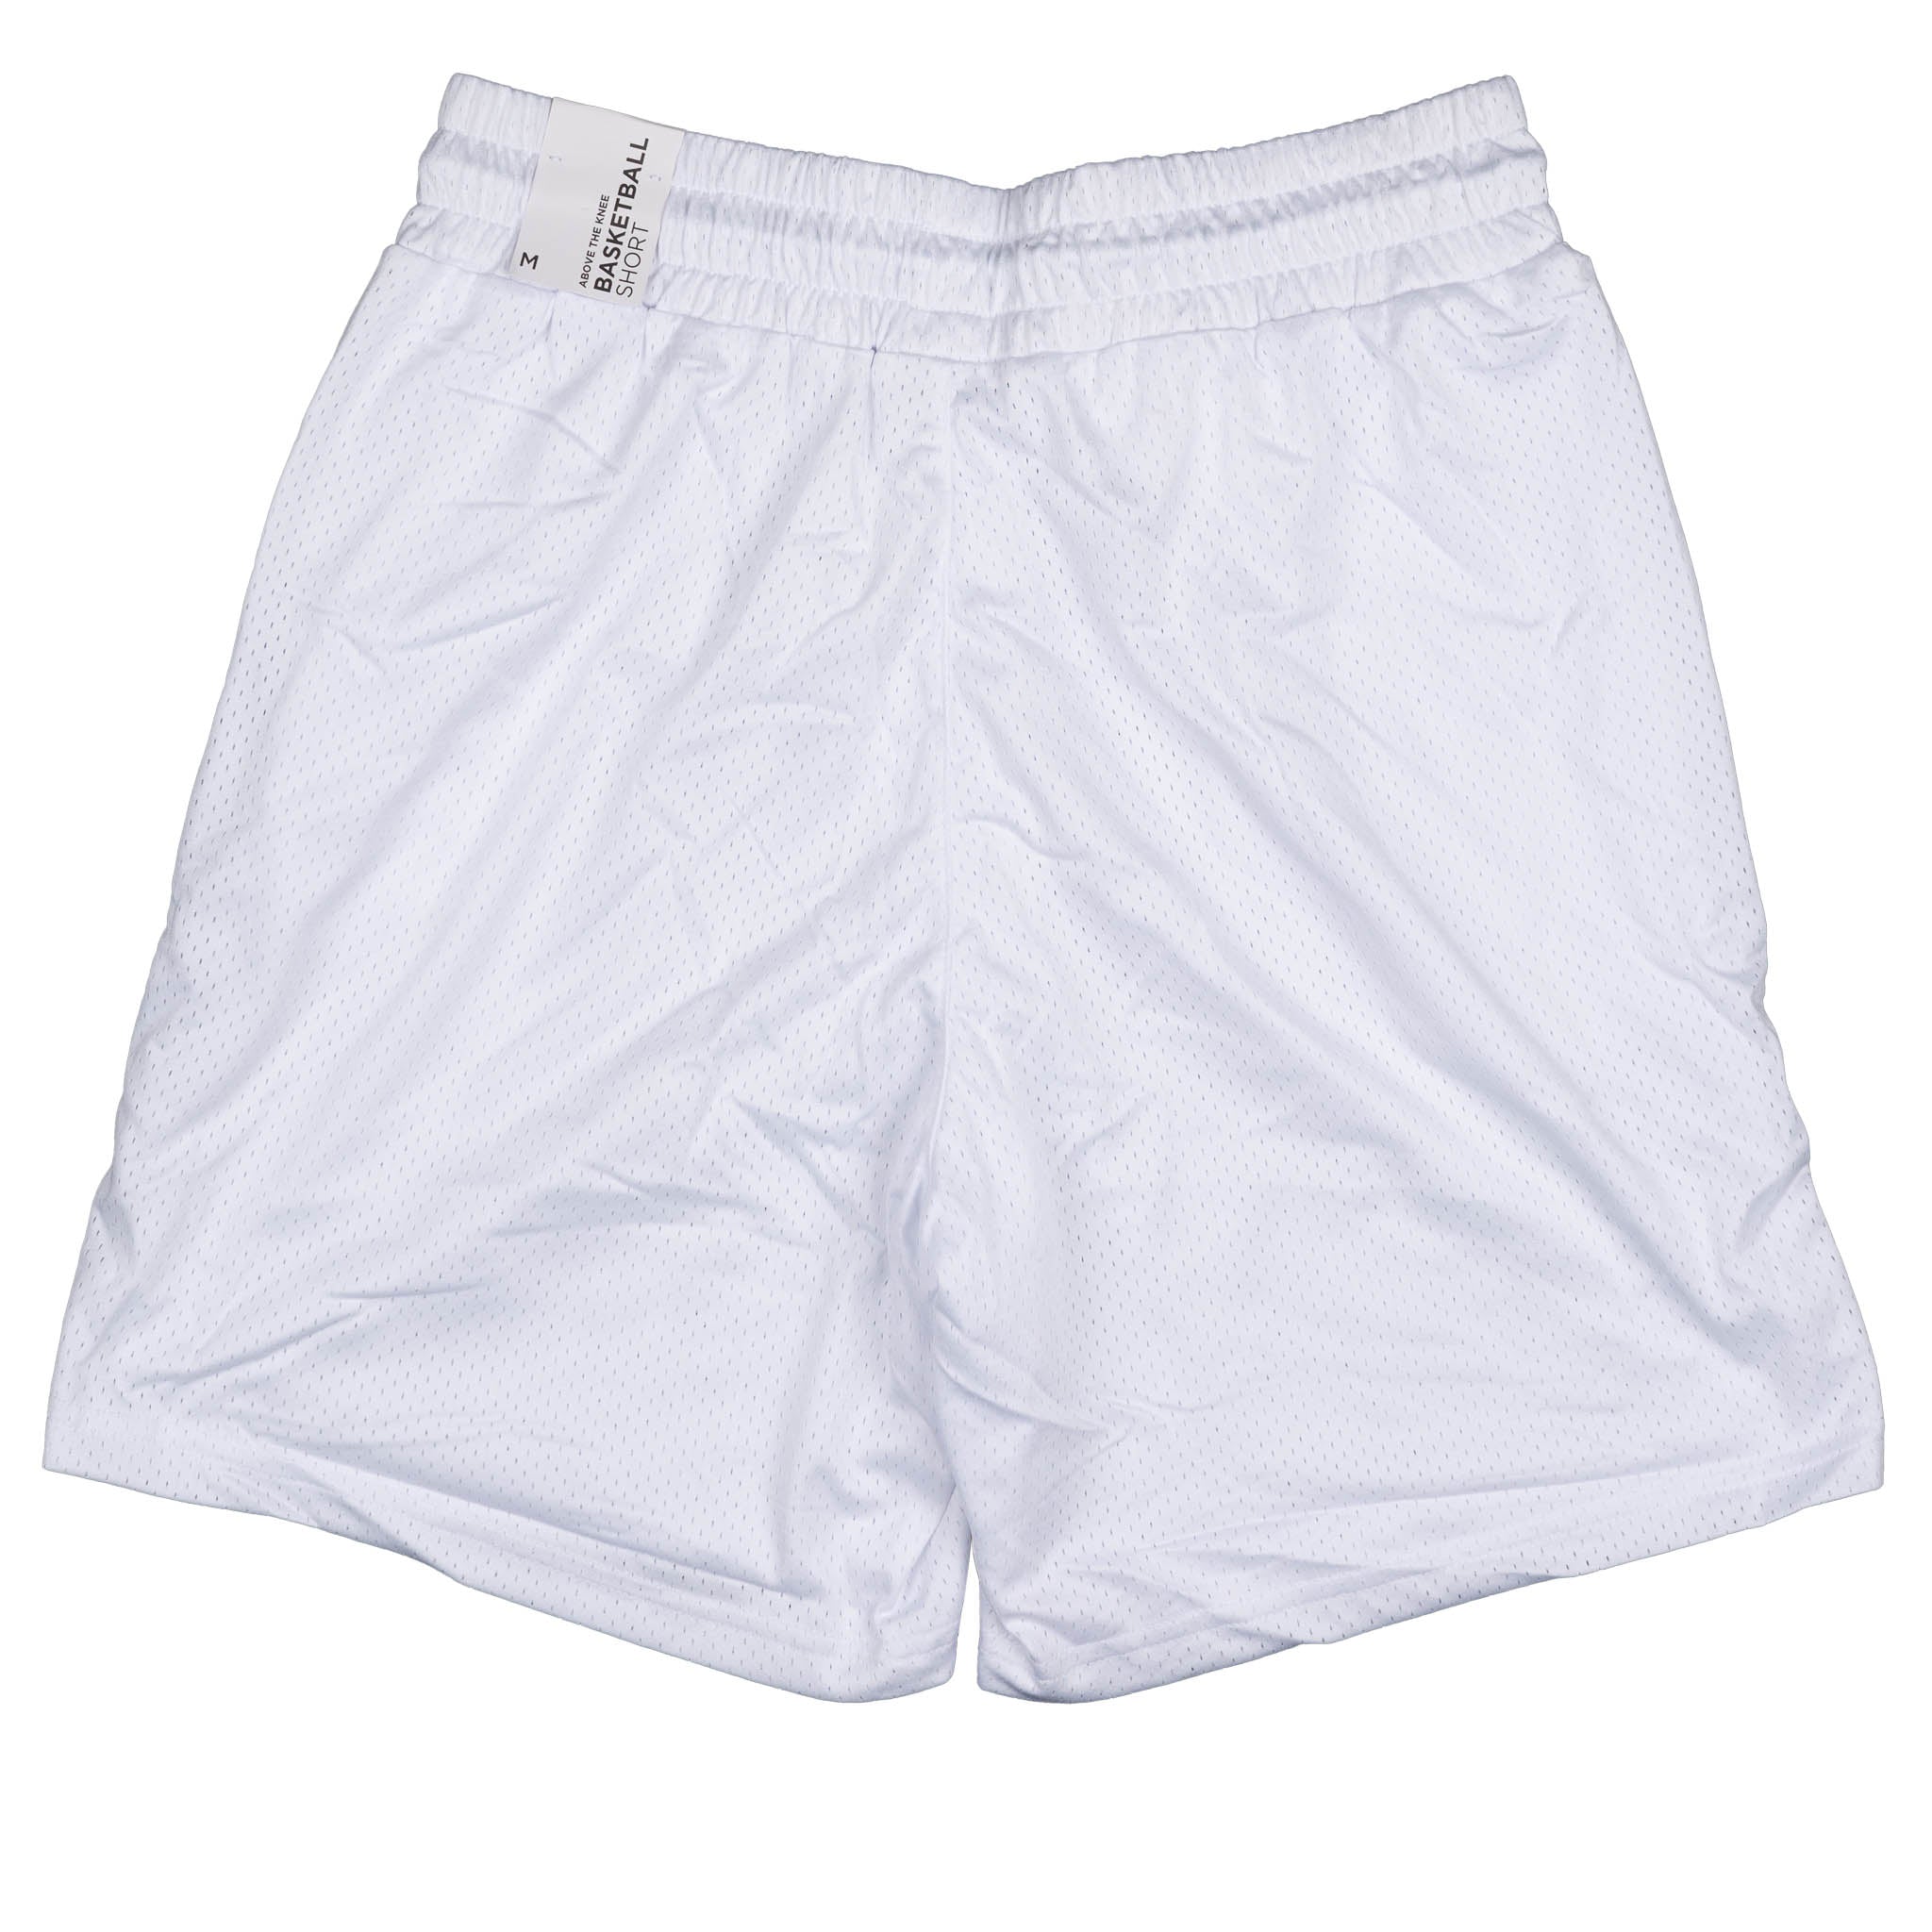 RUE21 ABOVE THE KNEE BASKETBALL SHORTS WHITE -  531411